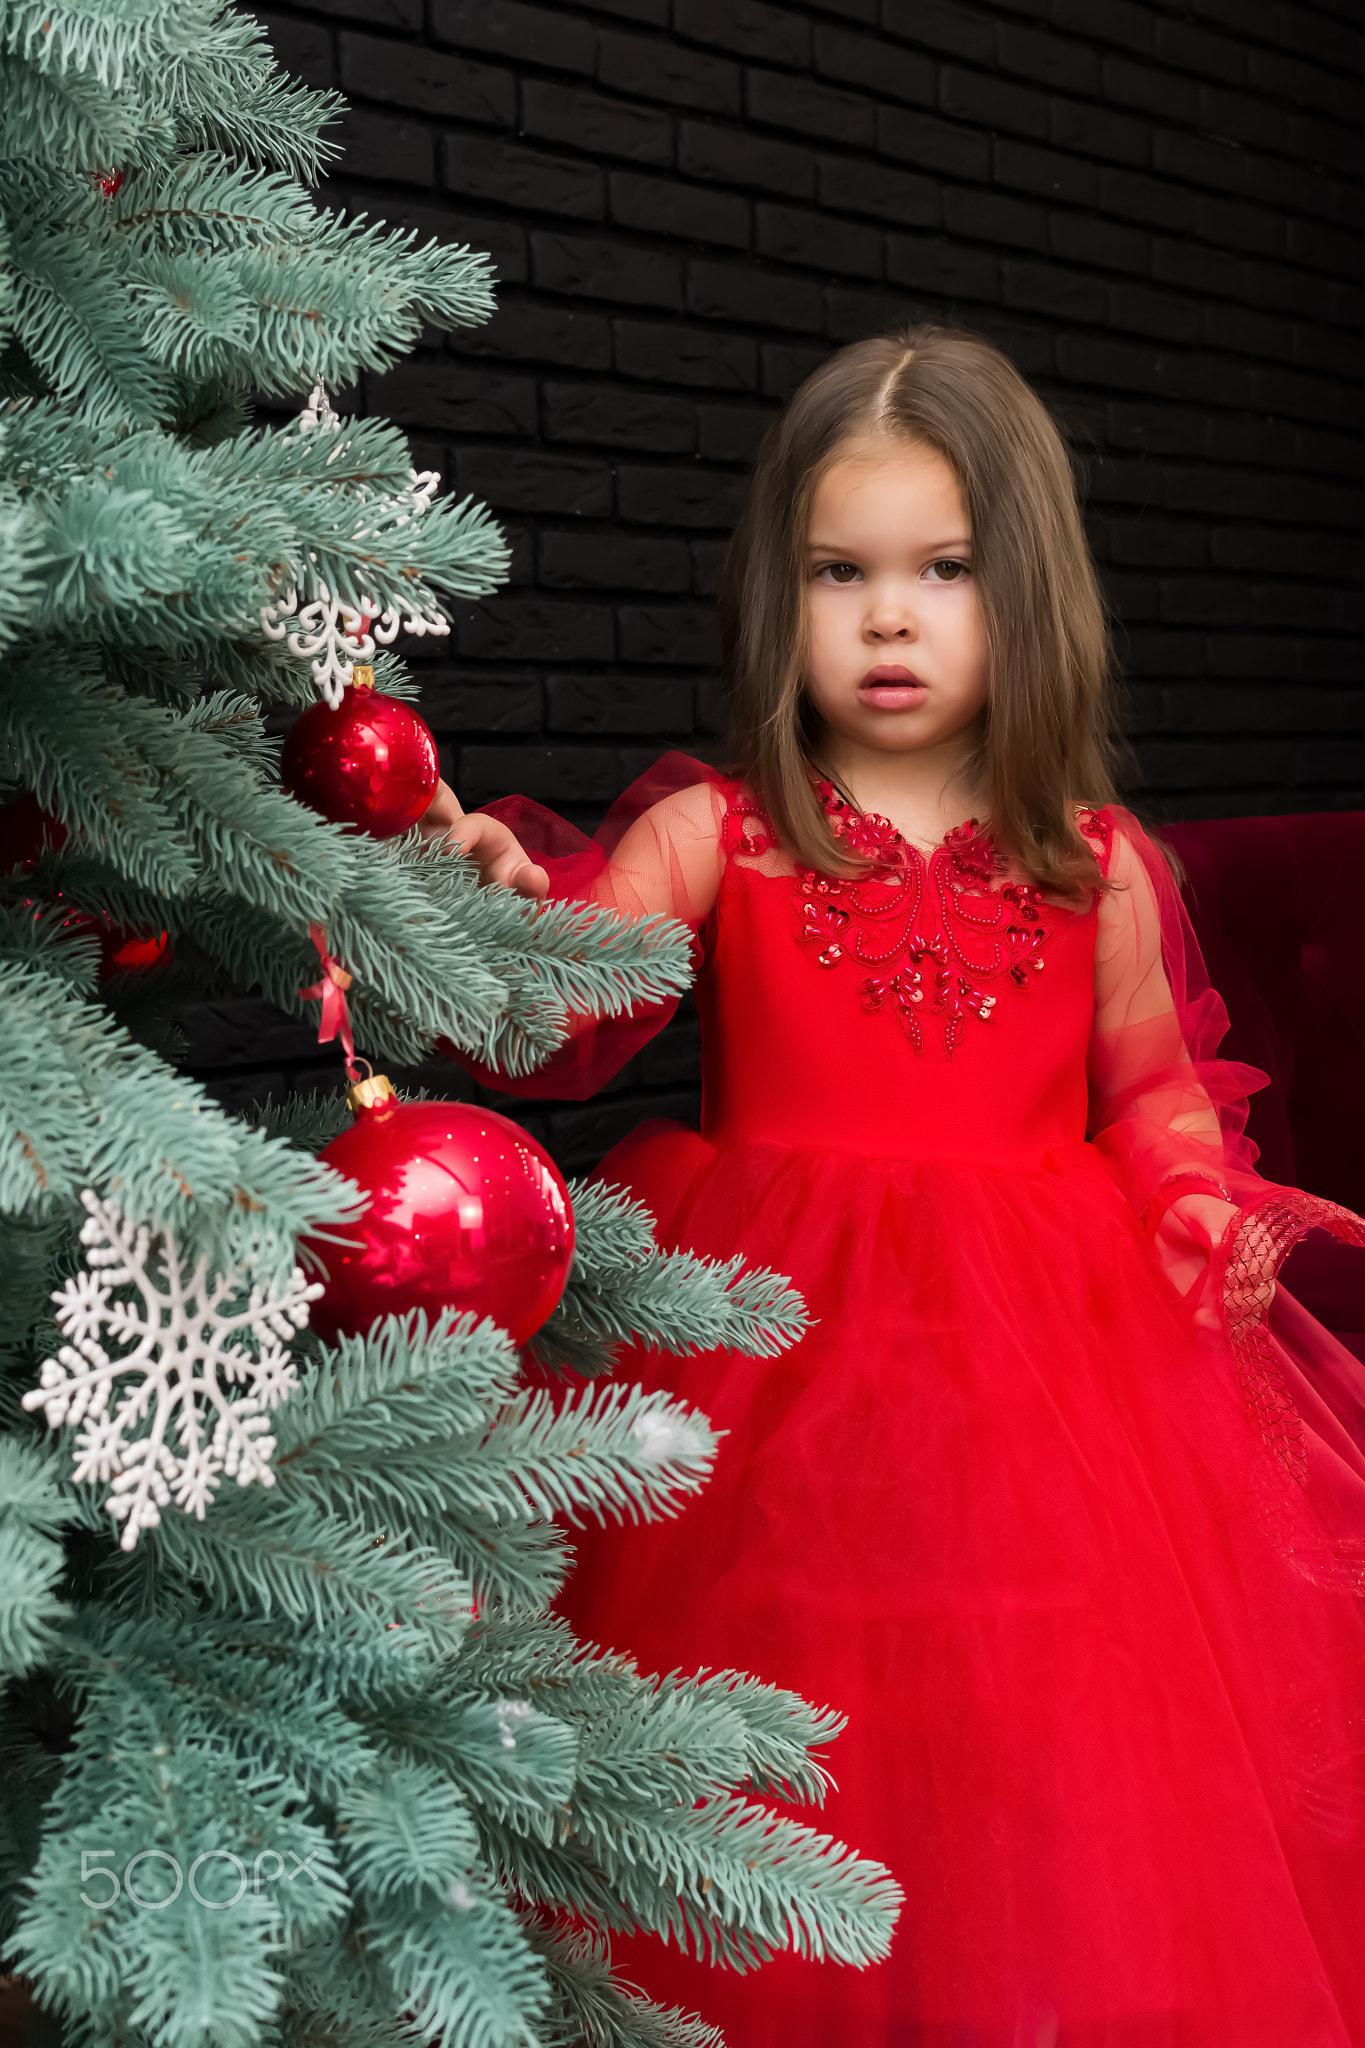 Little girl in red dress smiling by Christmas tree. Little beautiful girl in a red evening dress the